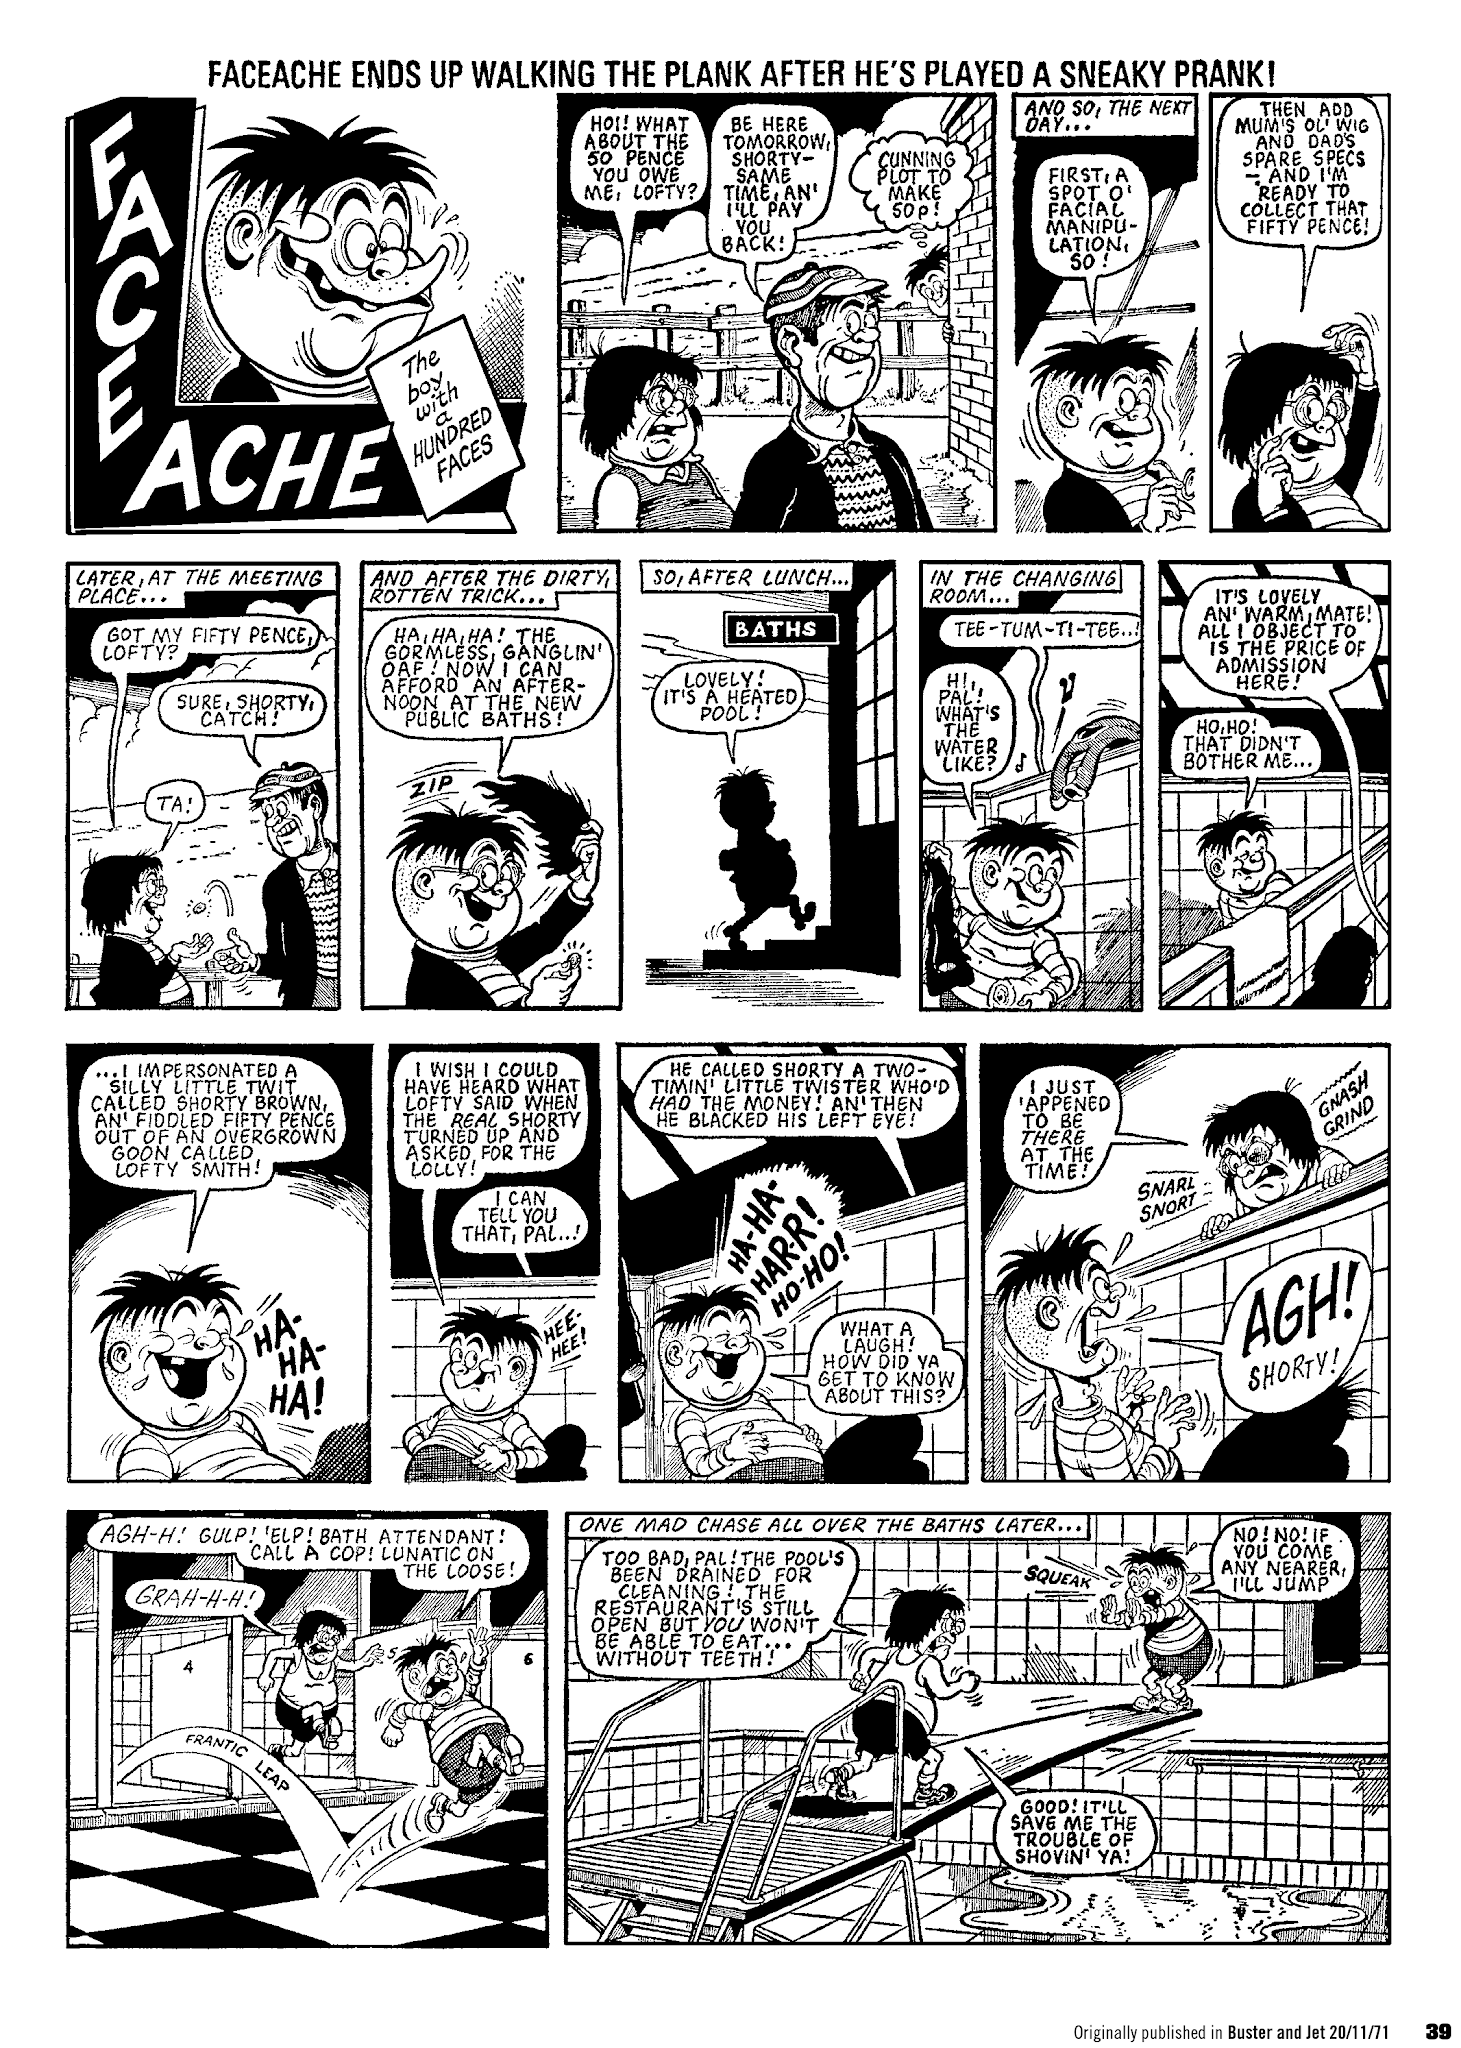 Read online Faceache: The First Hundred Scrunges comic -  Issue # TPB 1 - 41